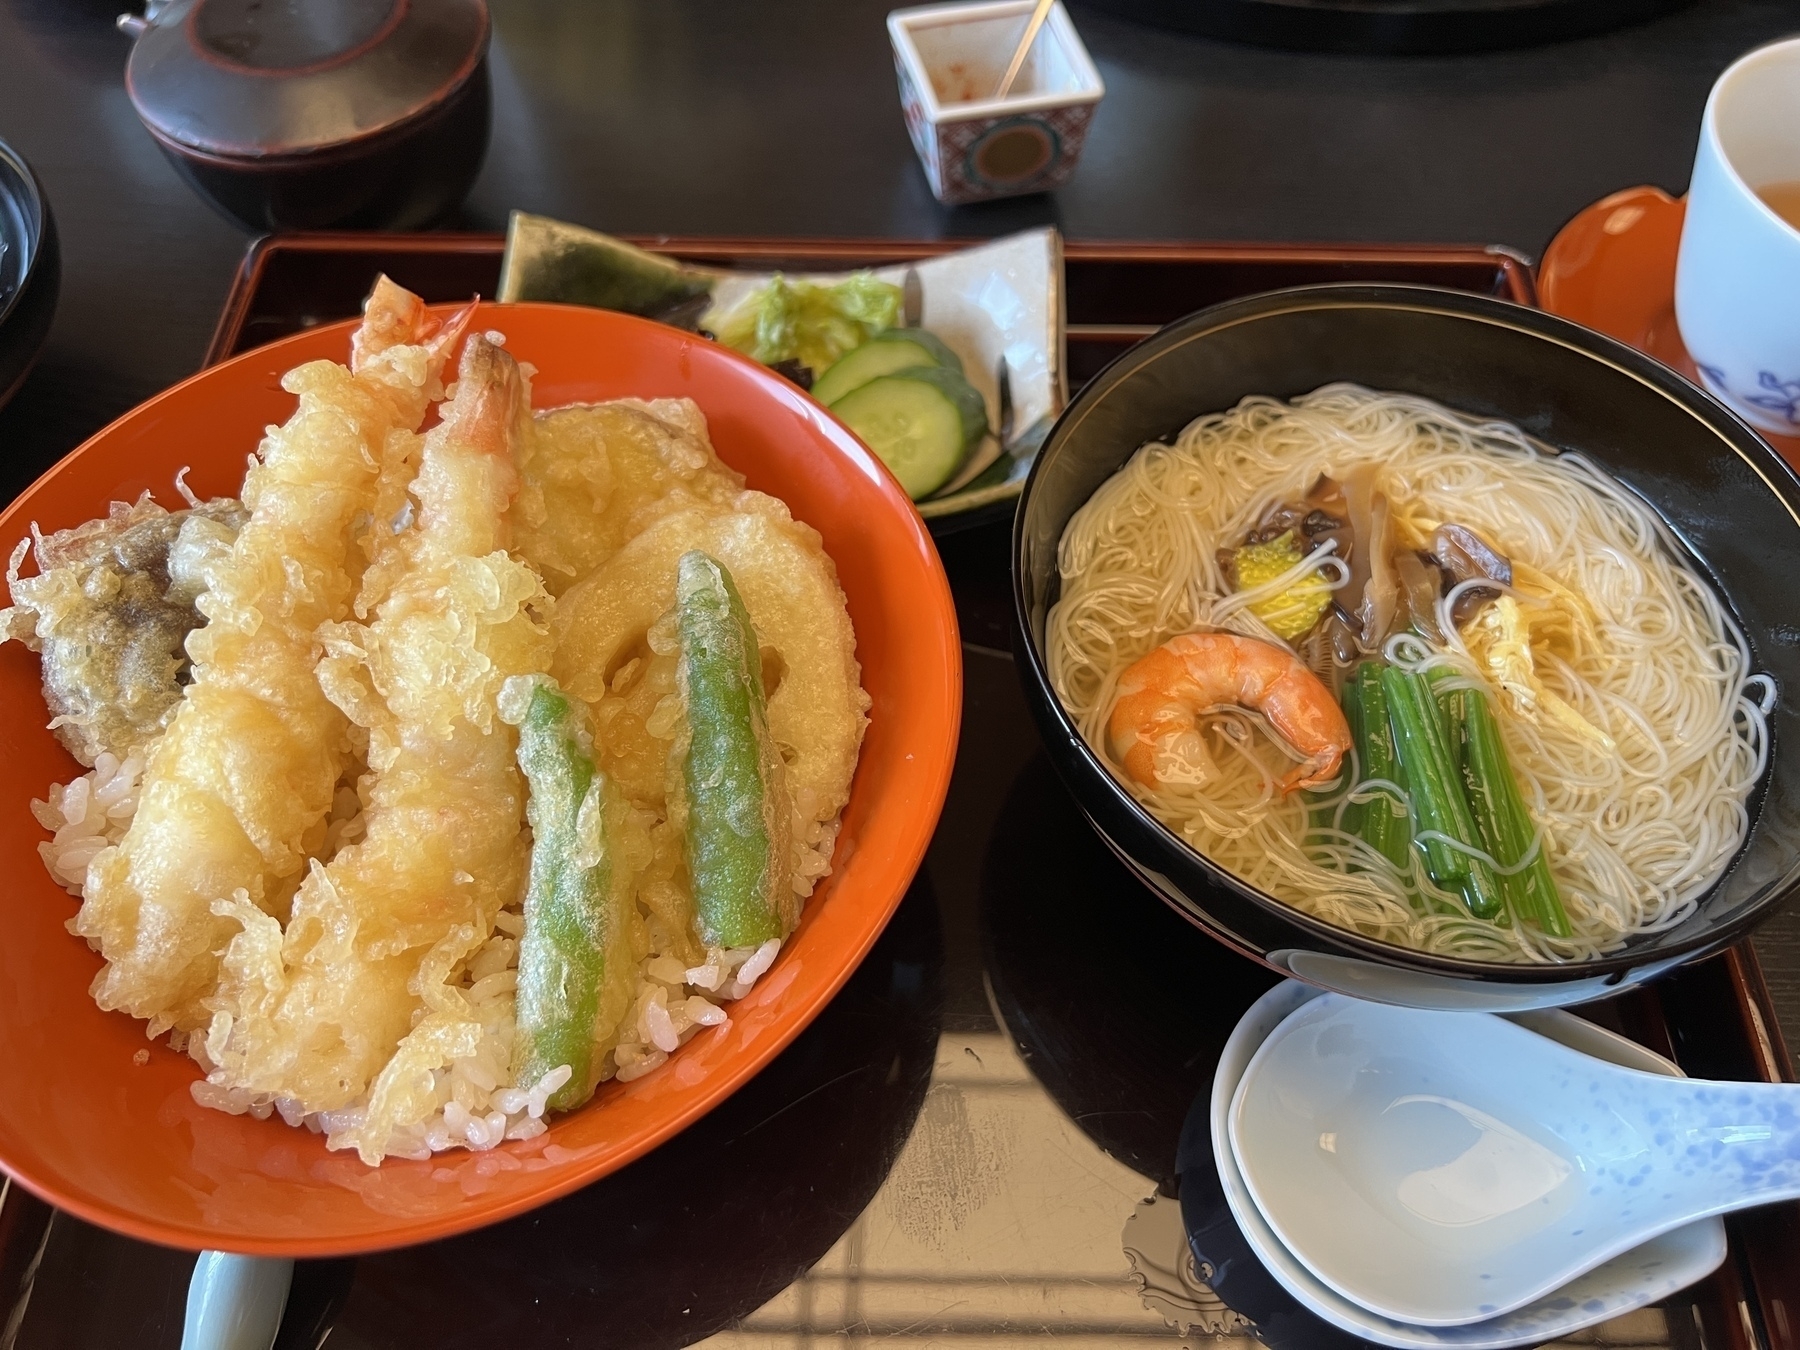 Tendon and Nyumen lunch set with some pickled vegetables 